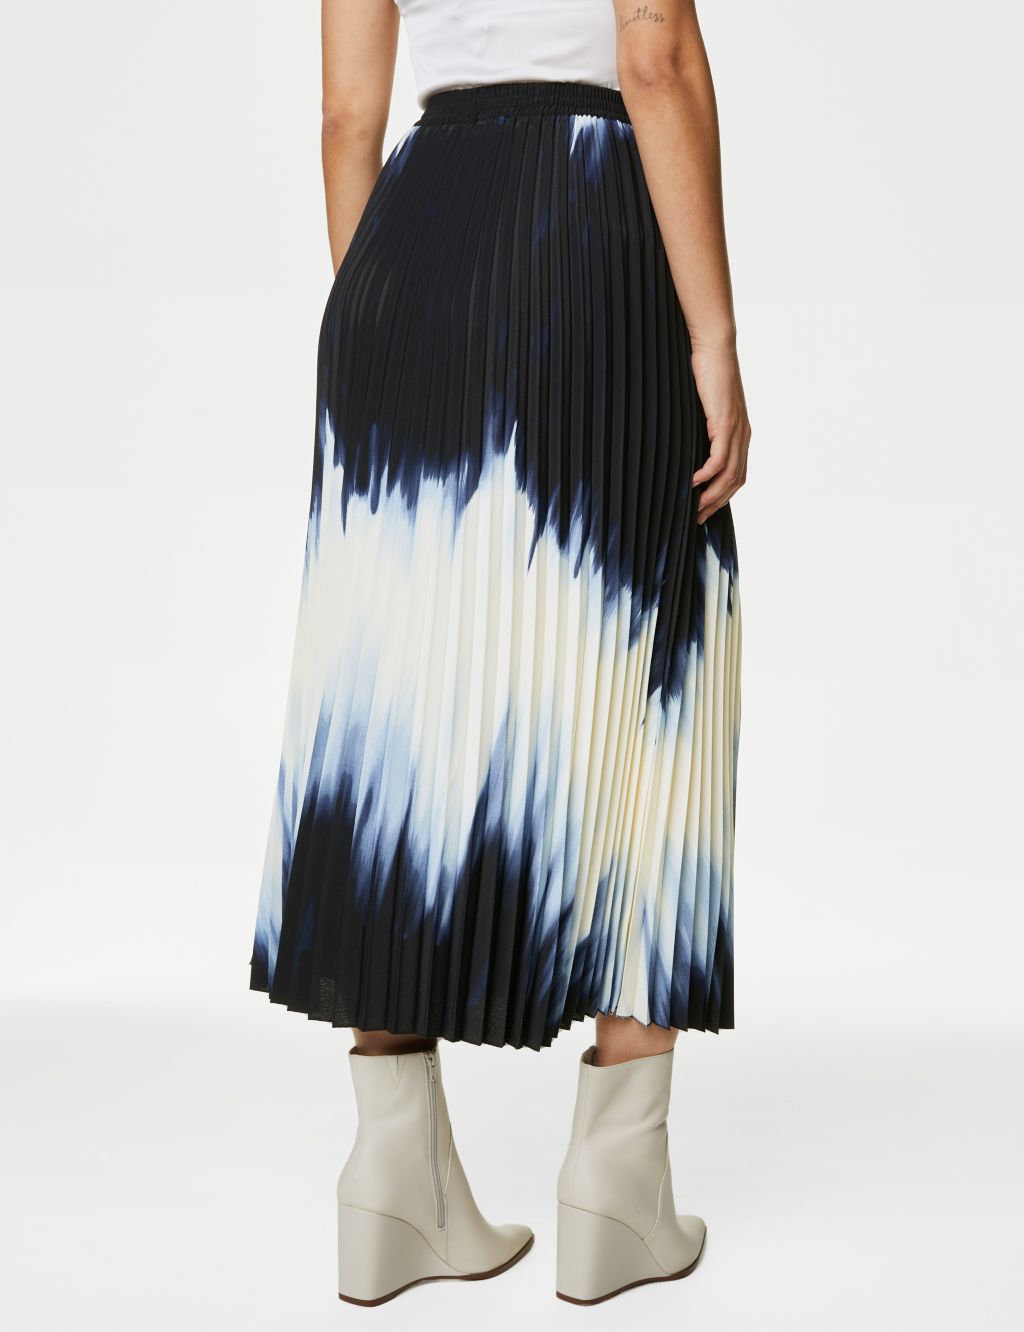 Ombre Pleated Midaxi Skirt image 5